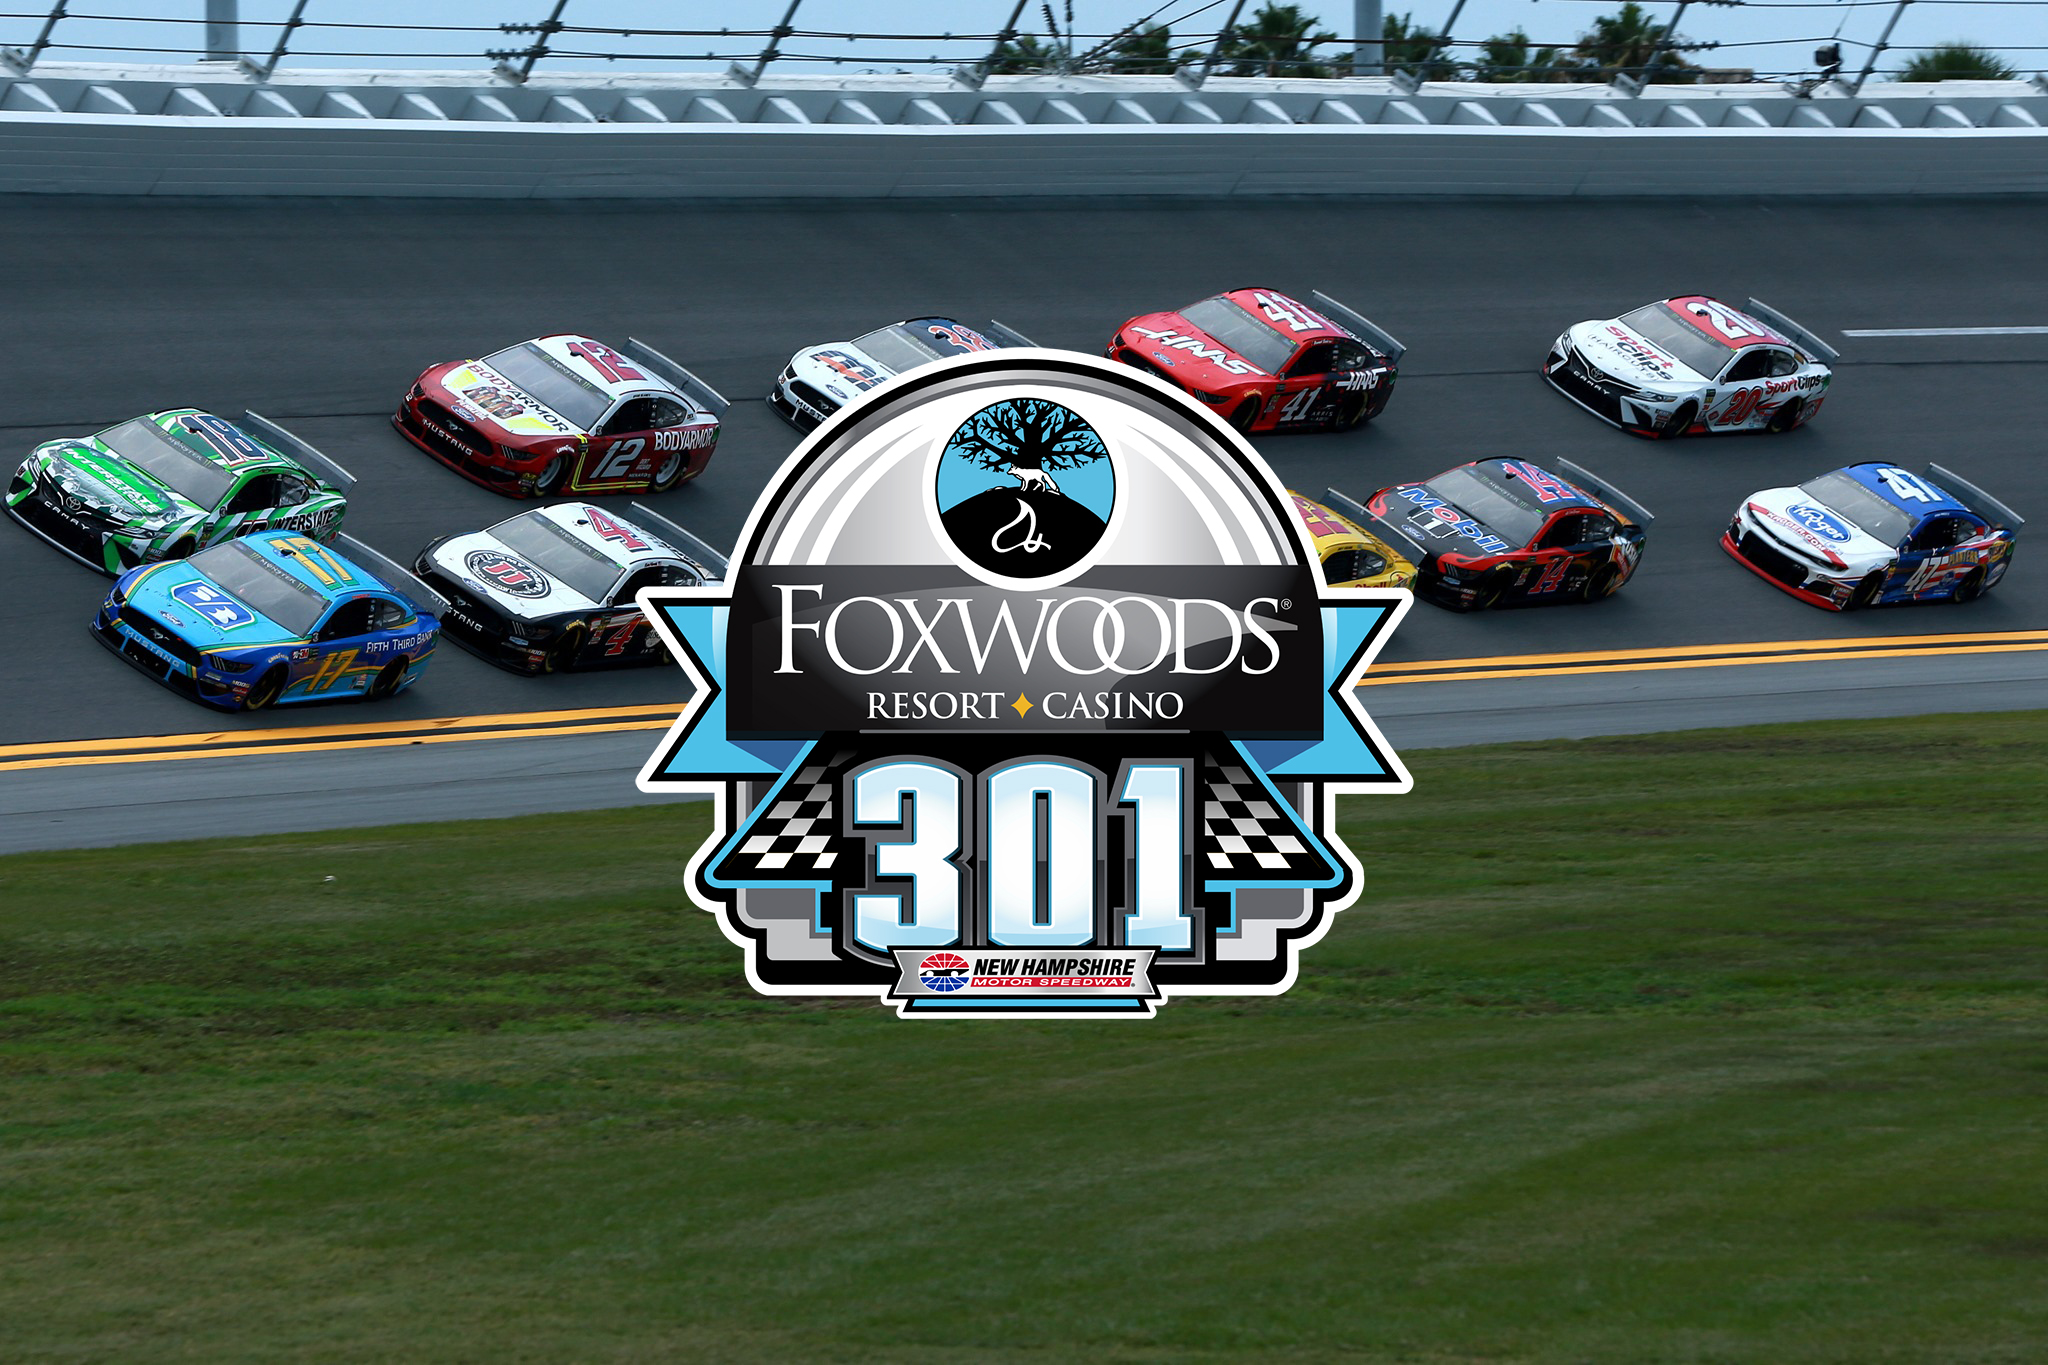 Win 4 Tickets to Foxwoods 301 at NHMS